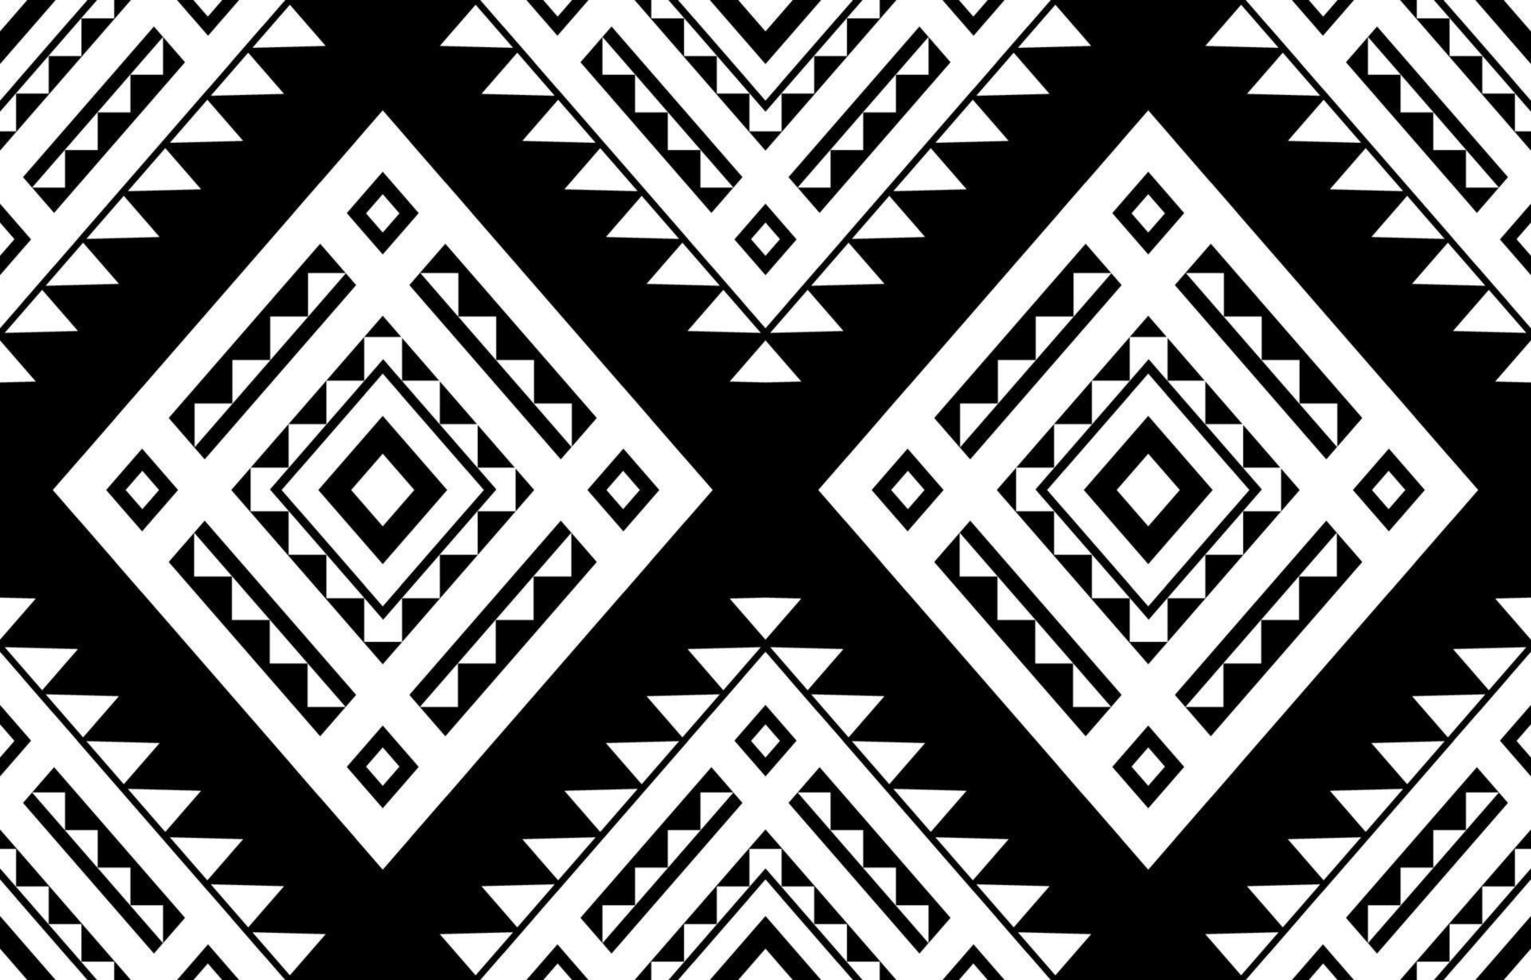 Geometric ethnic seamless pettern. Design for background, wallpaper, fabric, clothing, carpet, embroidery vector